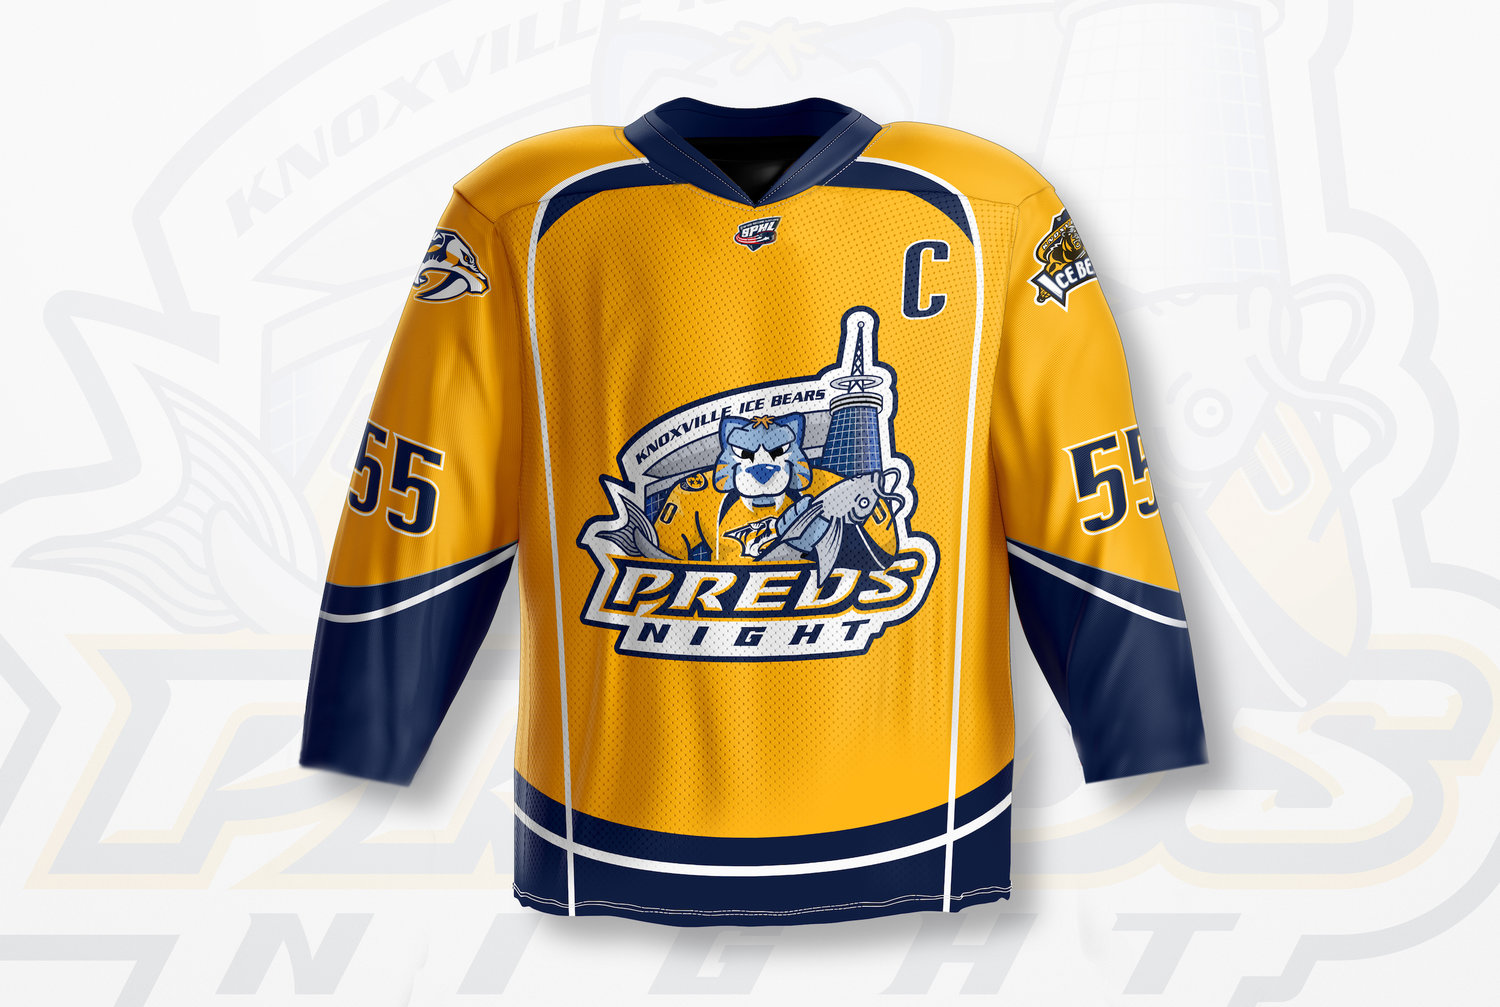 Preds Night jerseys are LIVE on - Knoxville Ice Bears